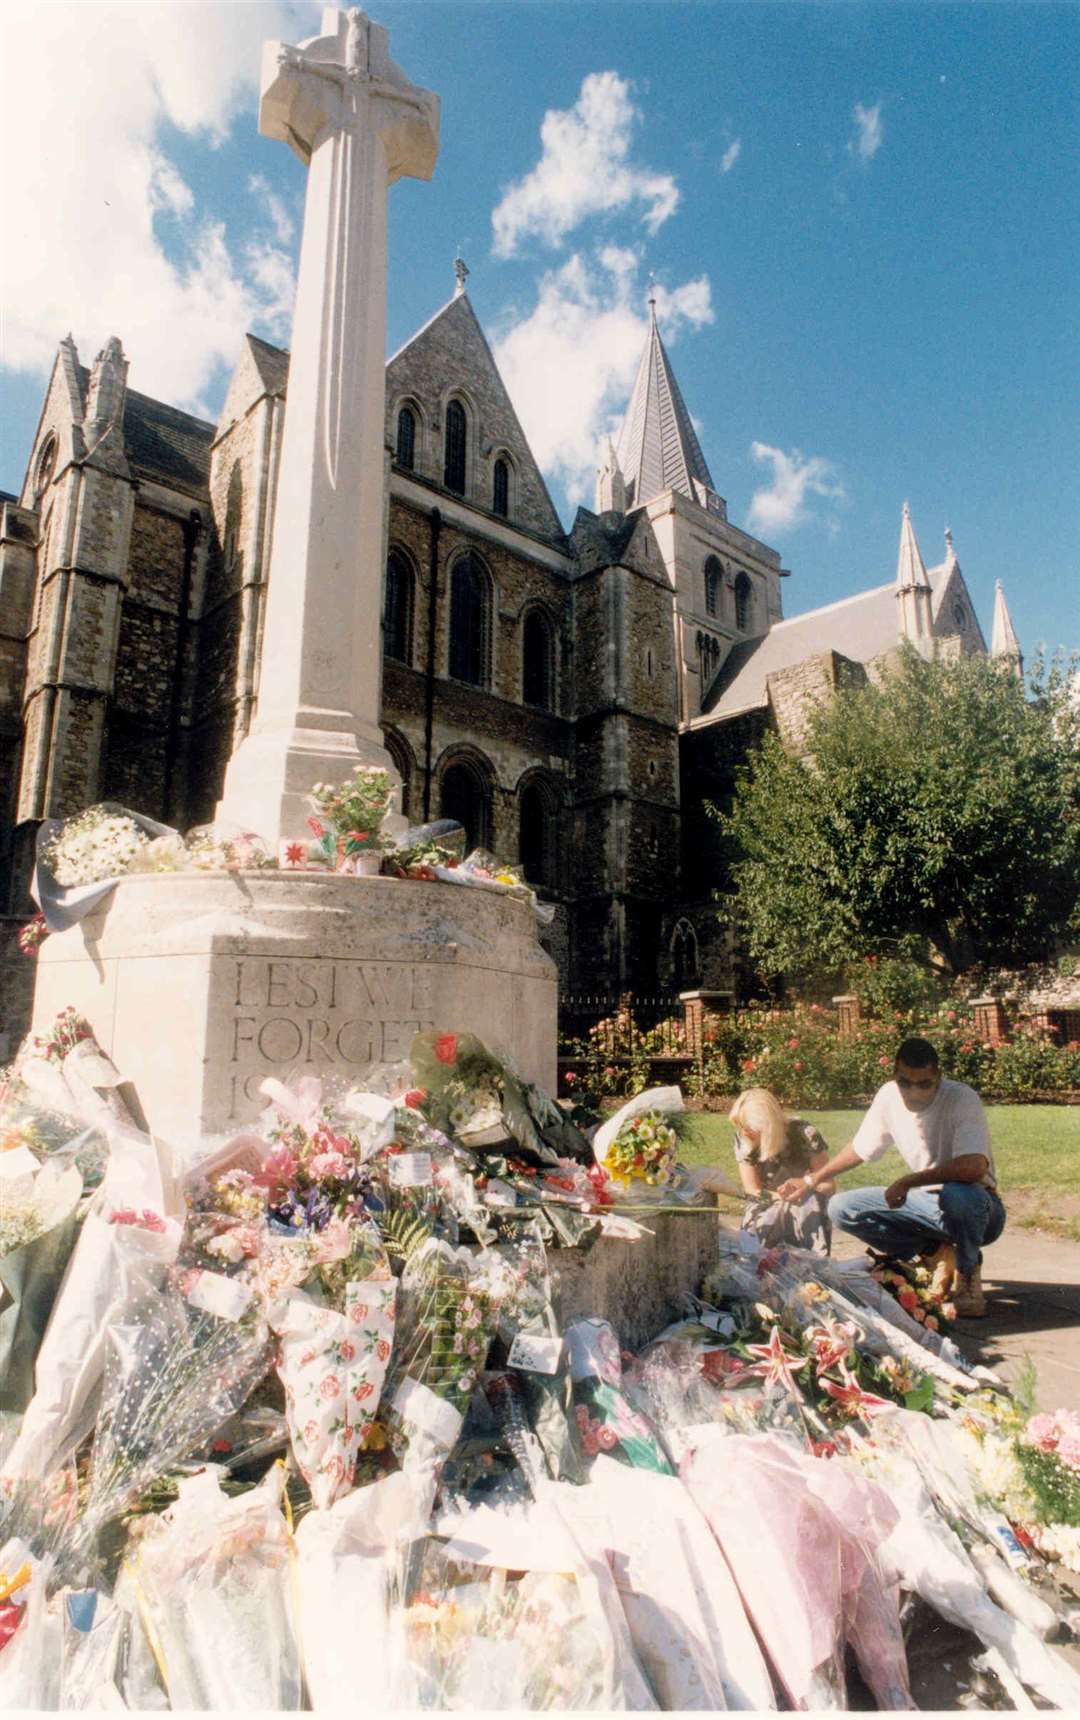 More flowers for Princess Diana, left outside Rochester Cathedral in 1997